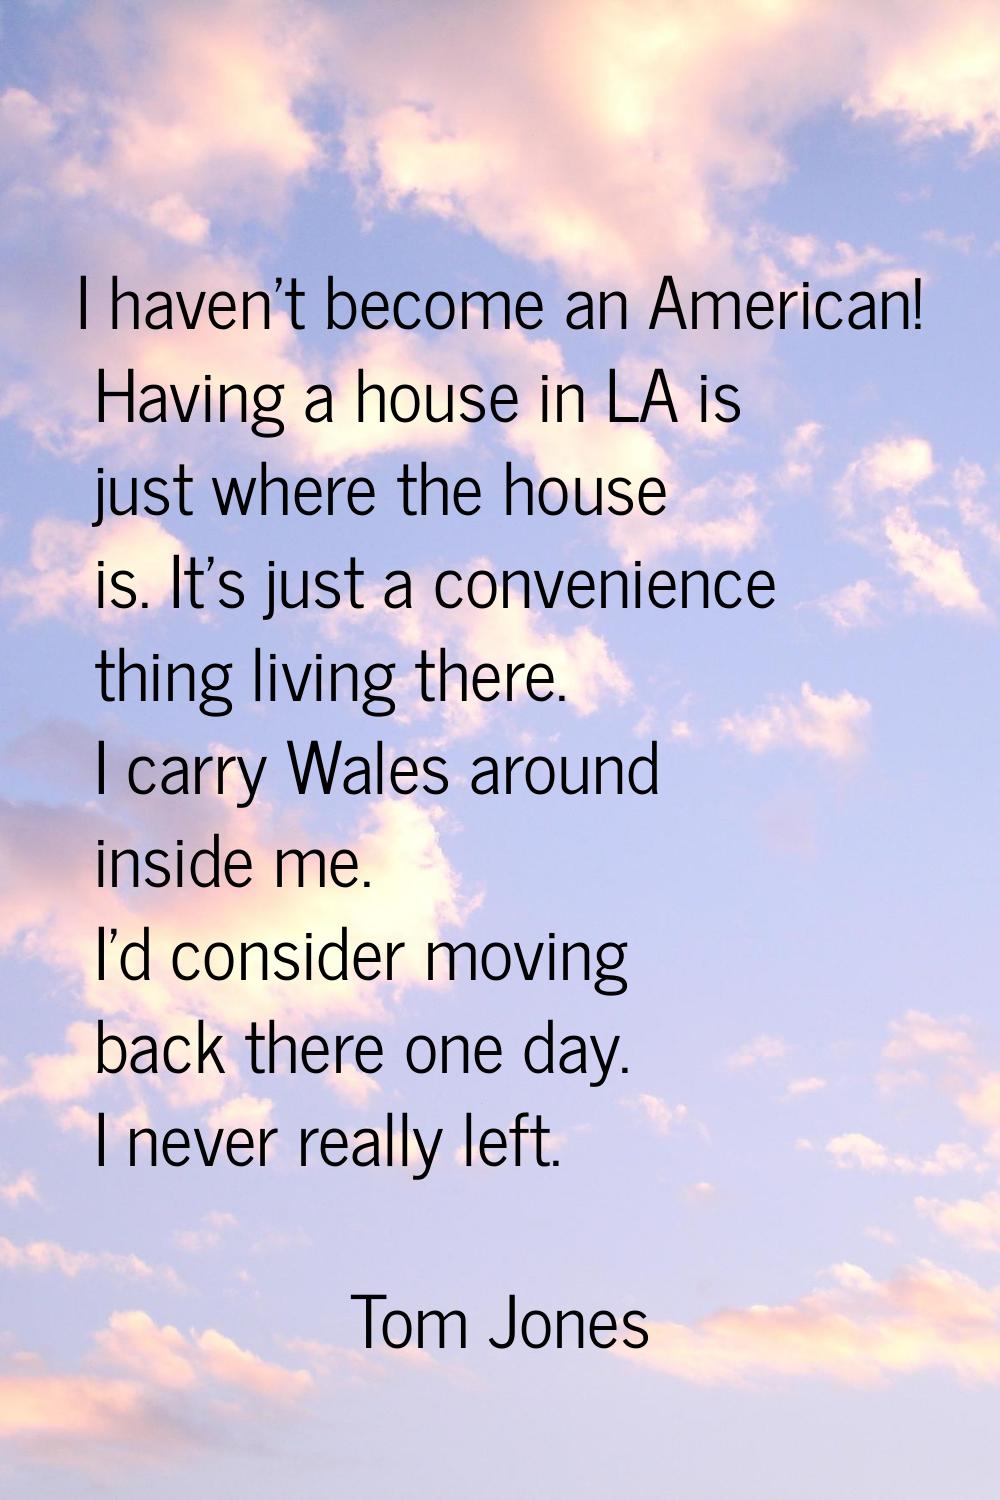 I haven't become an American! Having a house in LA is just where the house is. It's just a convenie